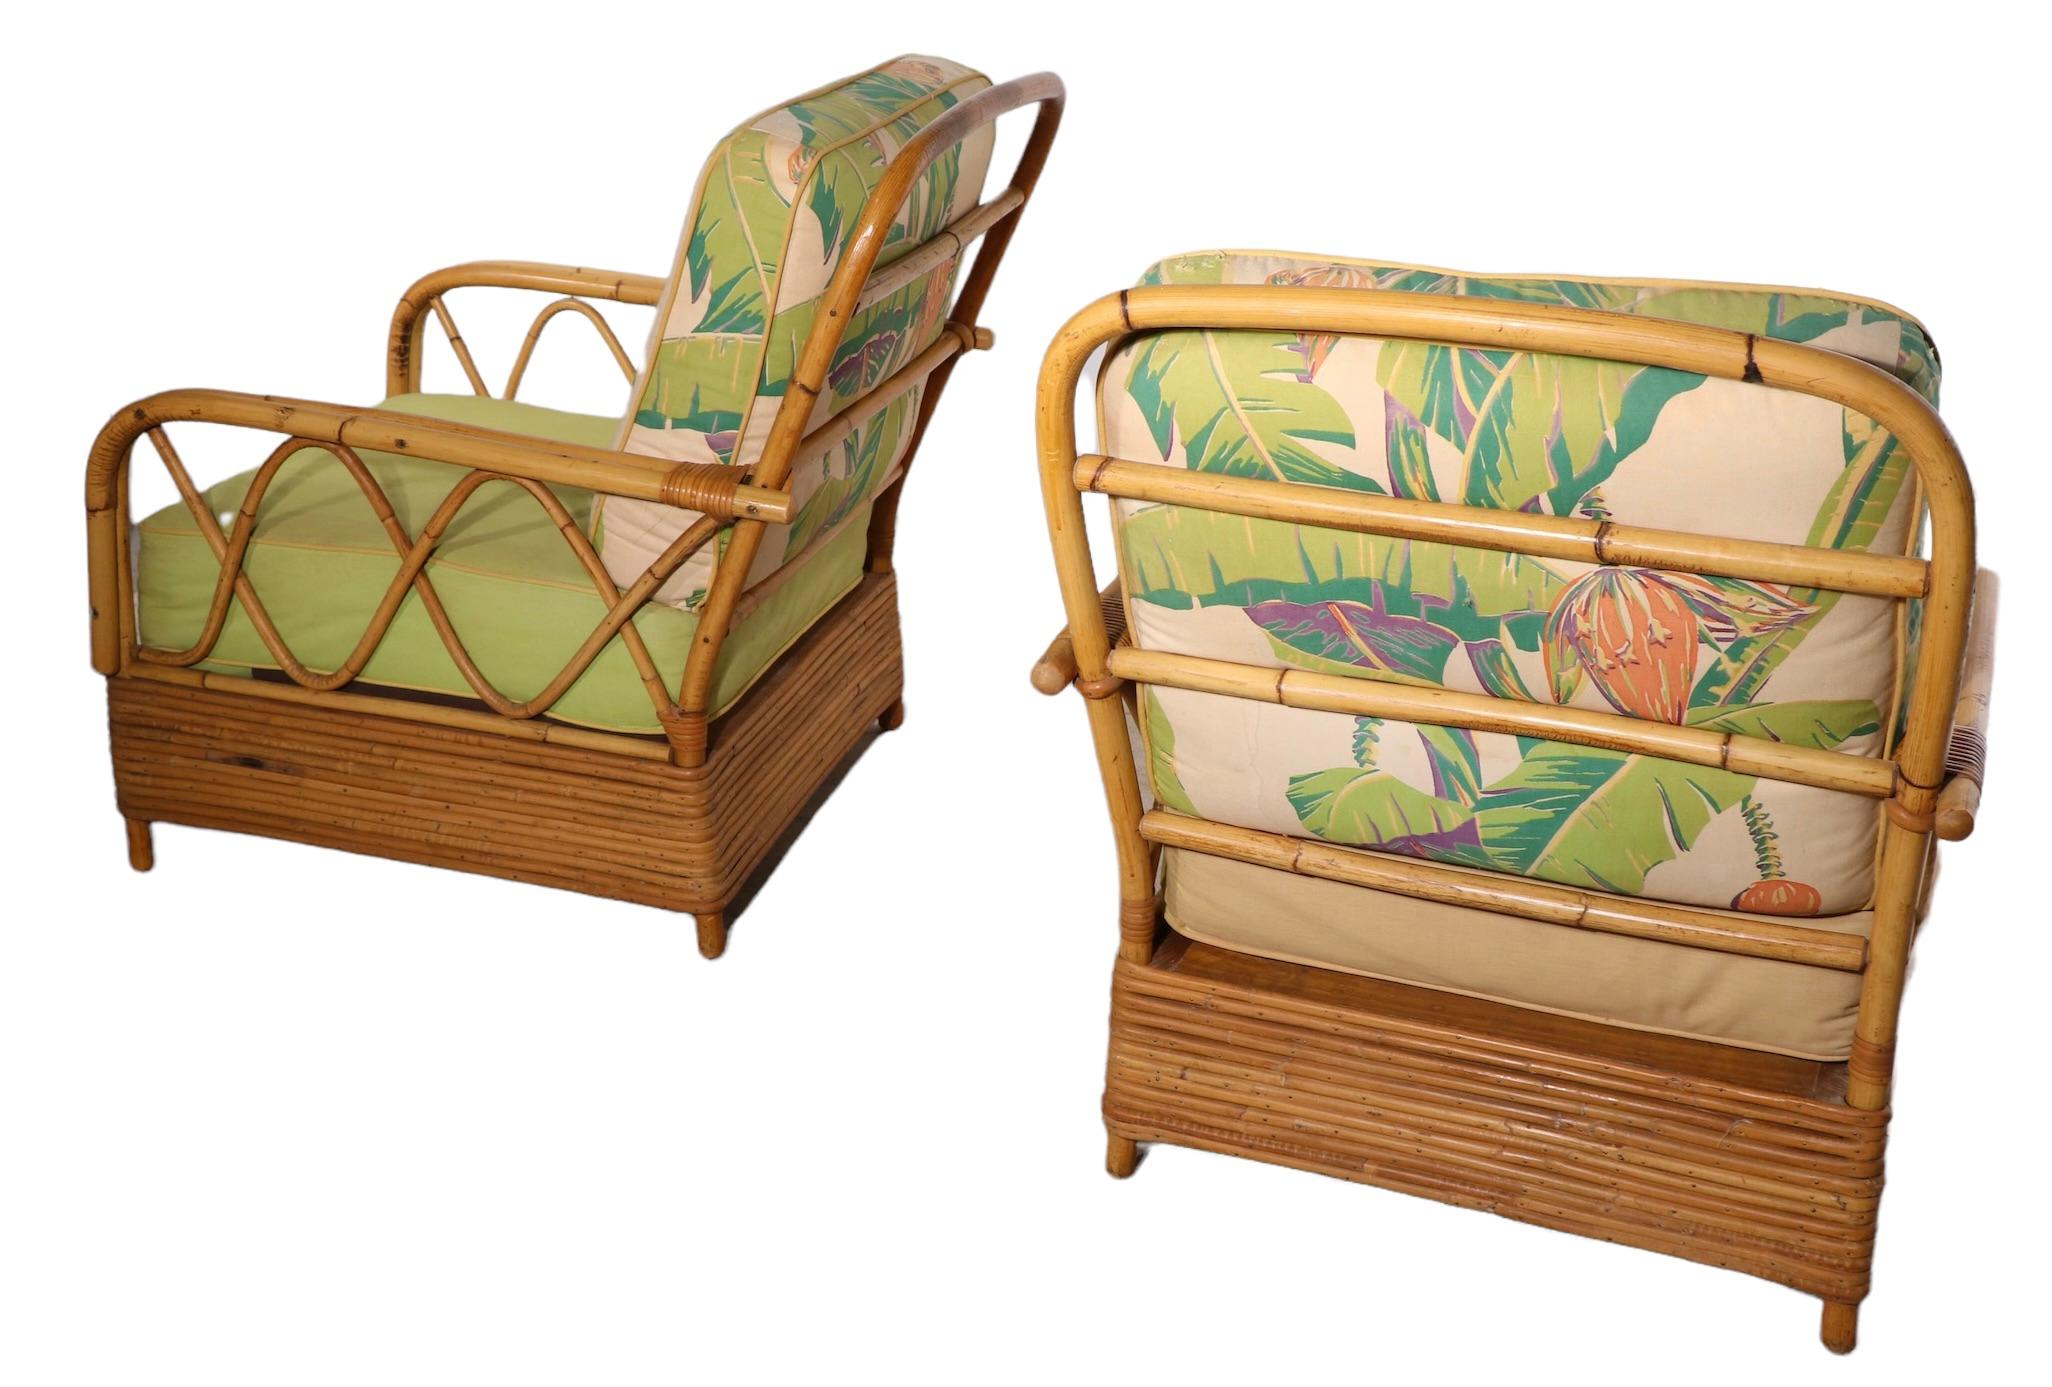 Voguish, chic pair of mid century lounge, club chairs by noted American furniture maker Ficks Reed. These chairs feature a plinth like banded bamboo base, with bent bamboo arms and back. The cushions are in original tropical floral print, usable as